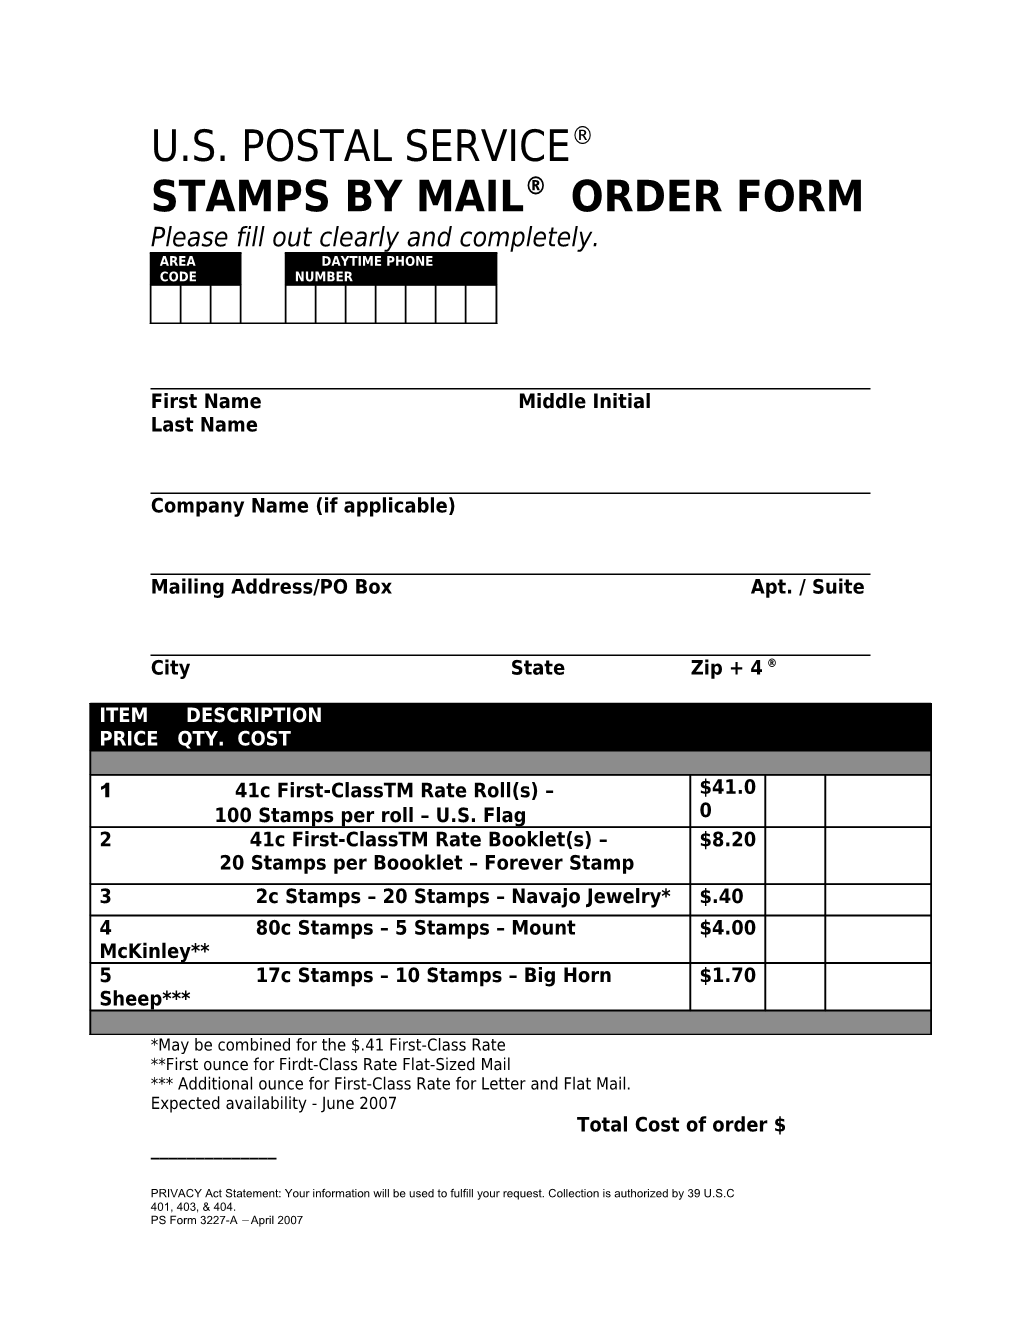 Stamps by Mail Order Form